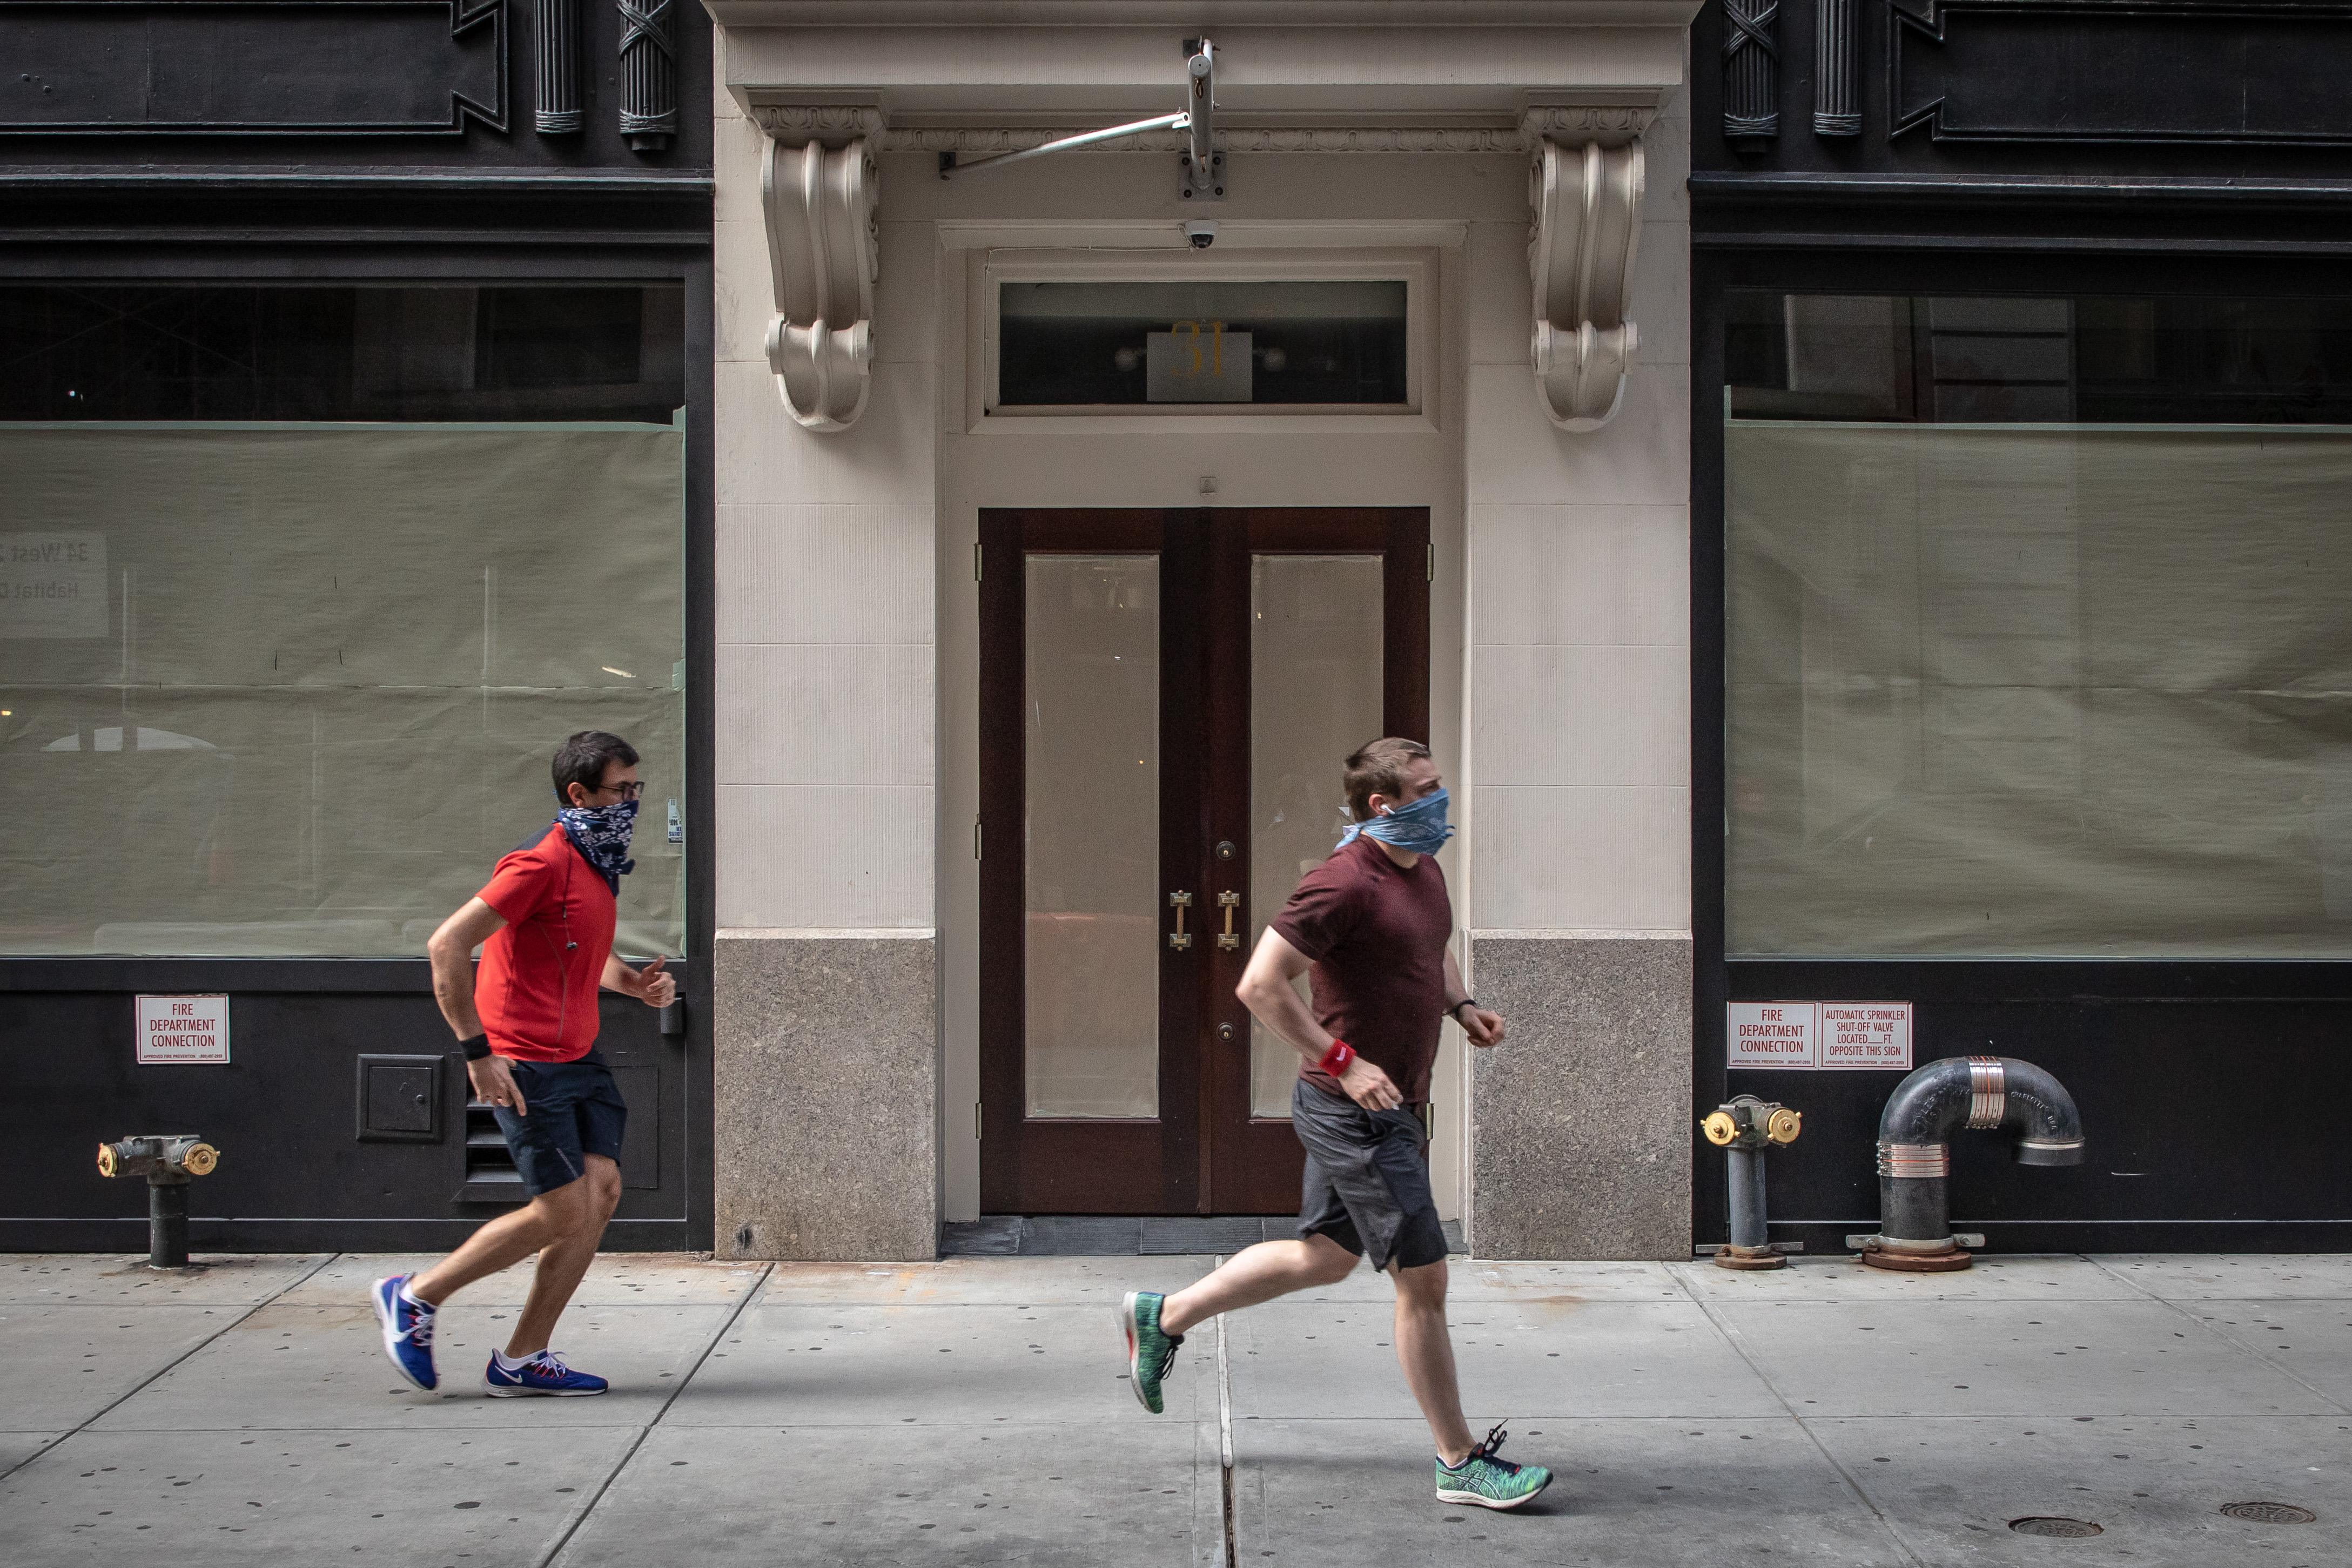 Two runners can be seen outside a storefront that has been covered up from the inside